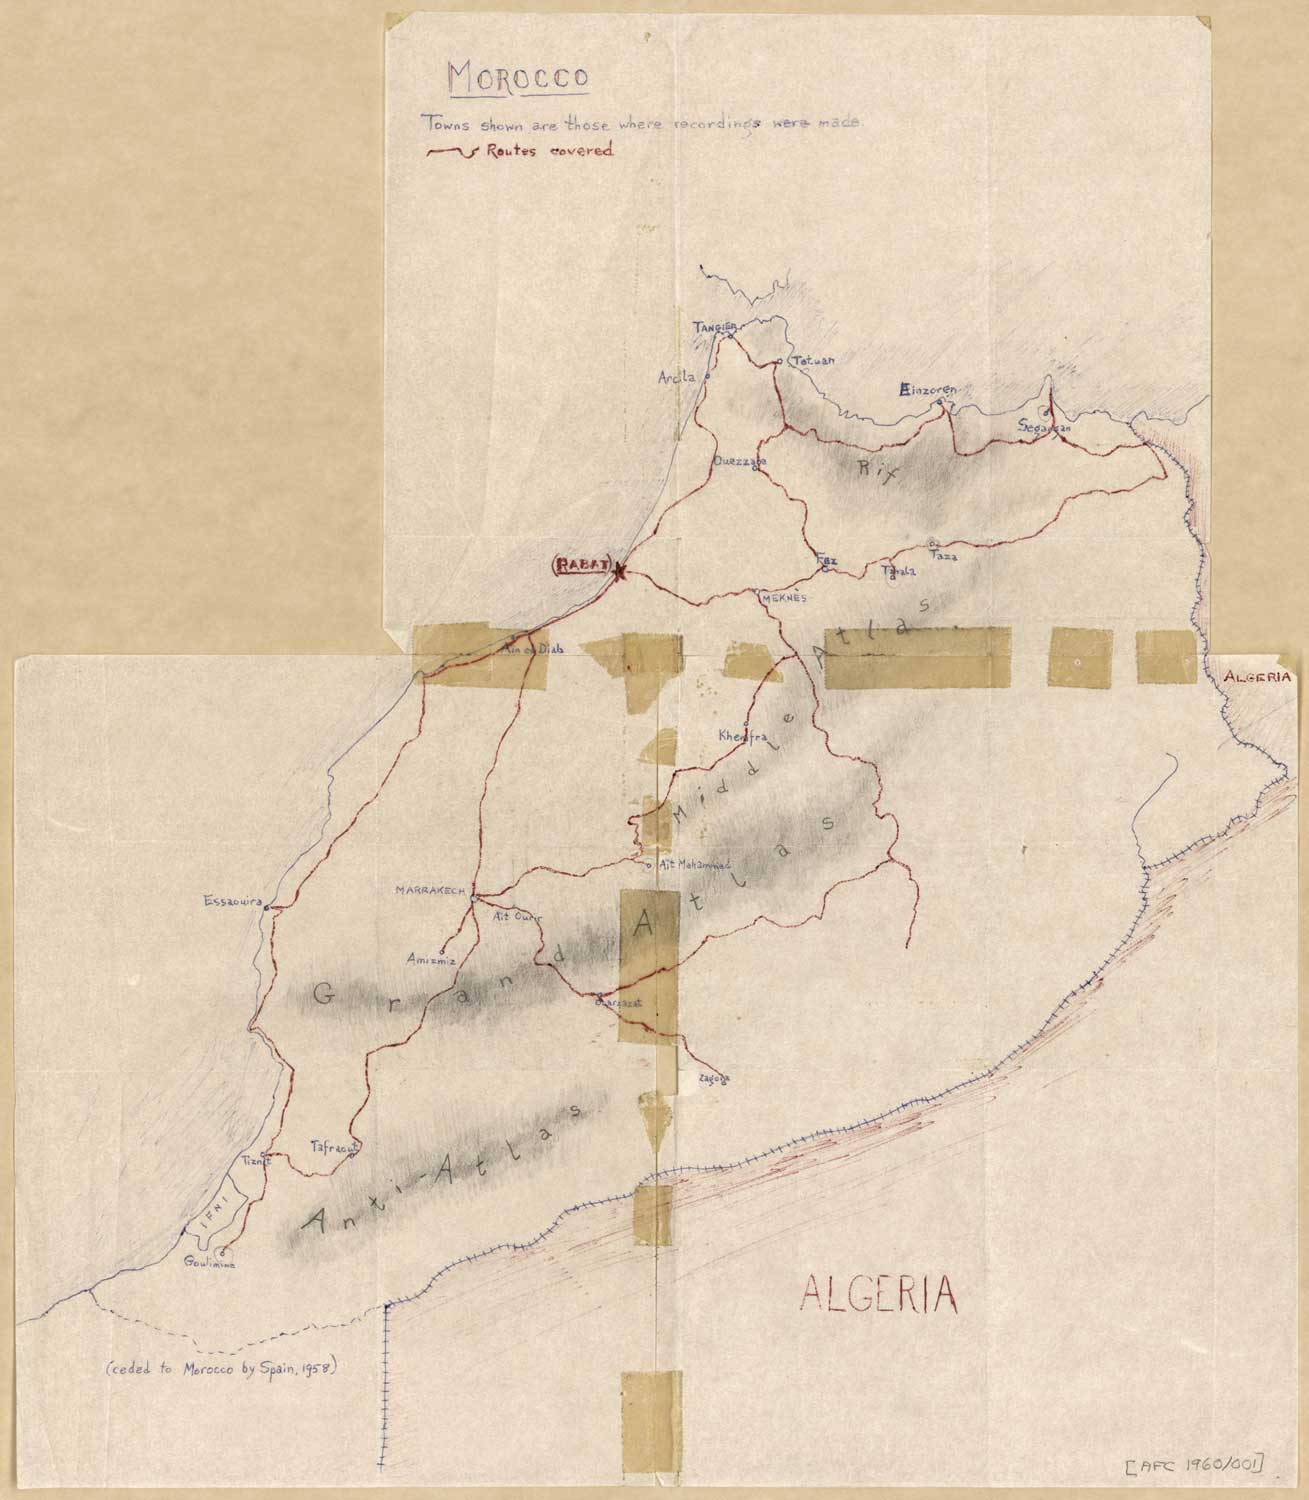 Paul Bowles - Hand drawn map indicating the route taken by Paul Bowles in the recording expedition and the cities in which recordings were made